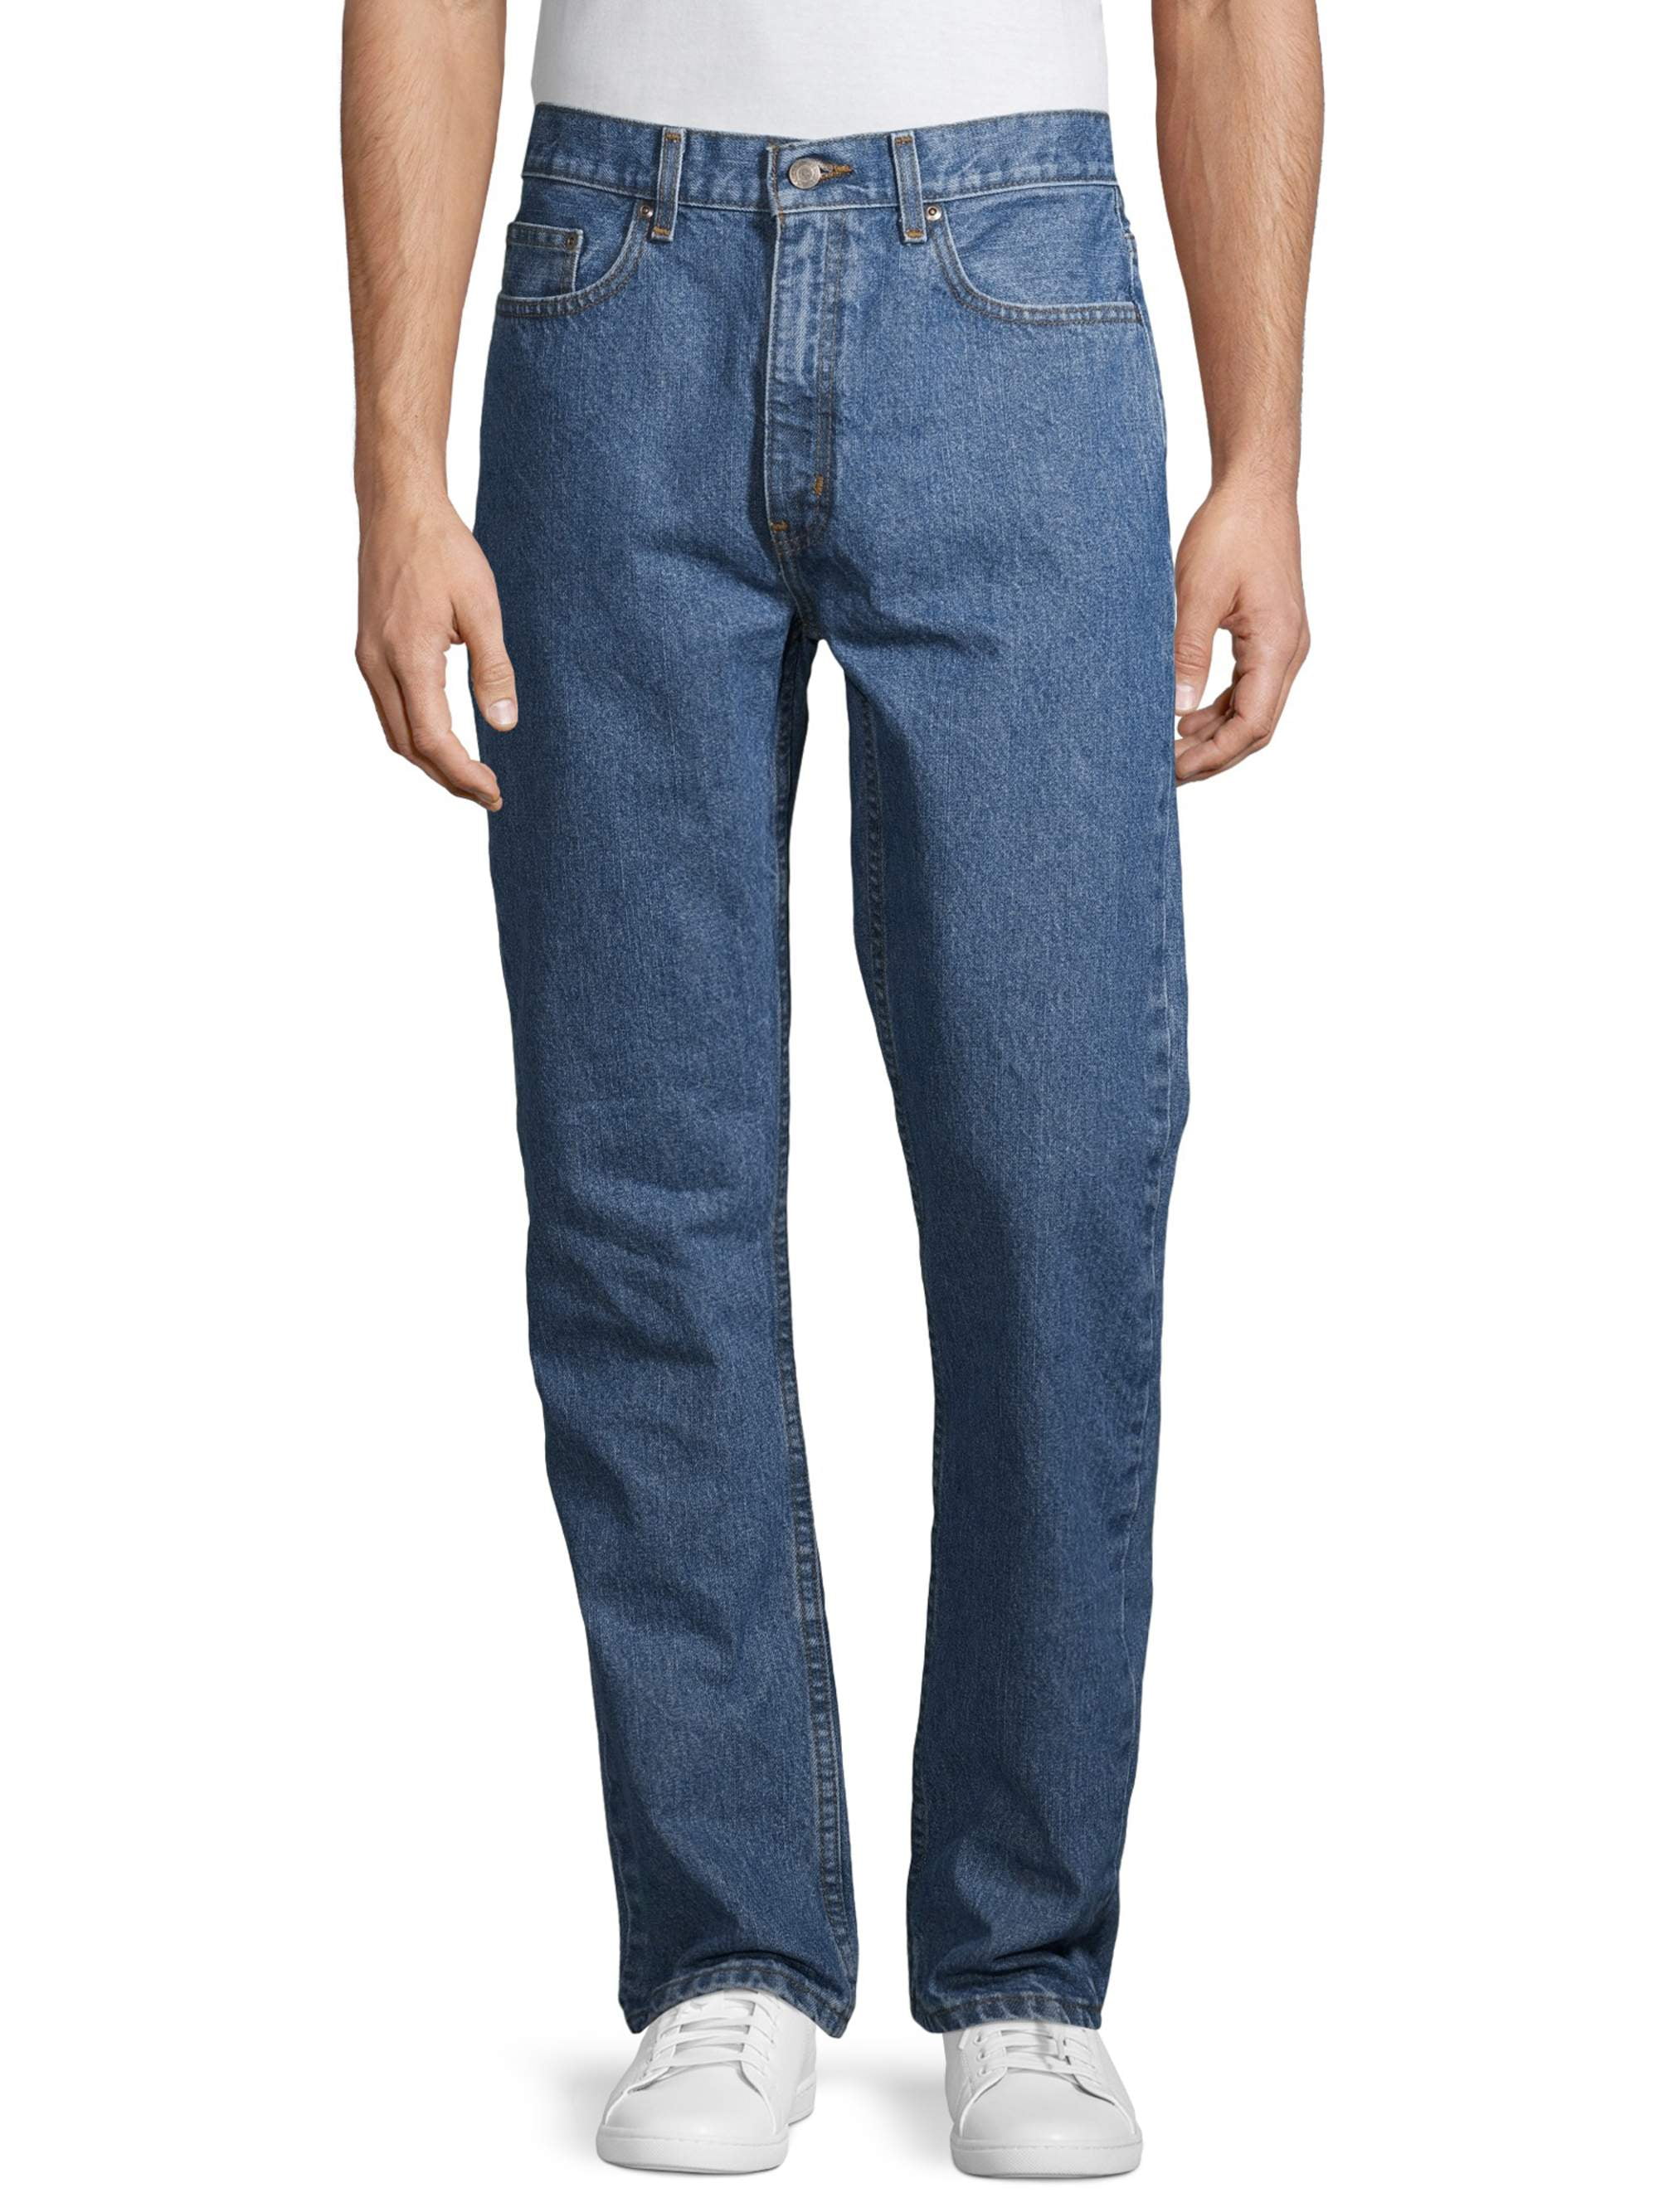 GEORGE - George Men's Relaxed Straight Fit Jeans - Walmart.com ...